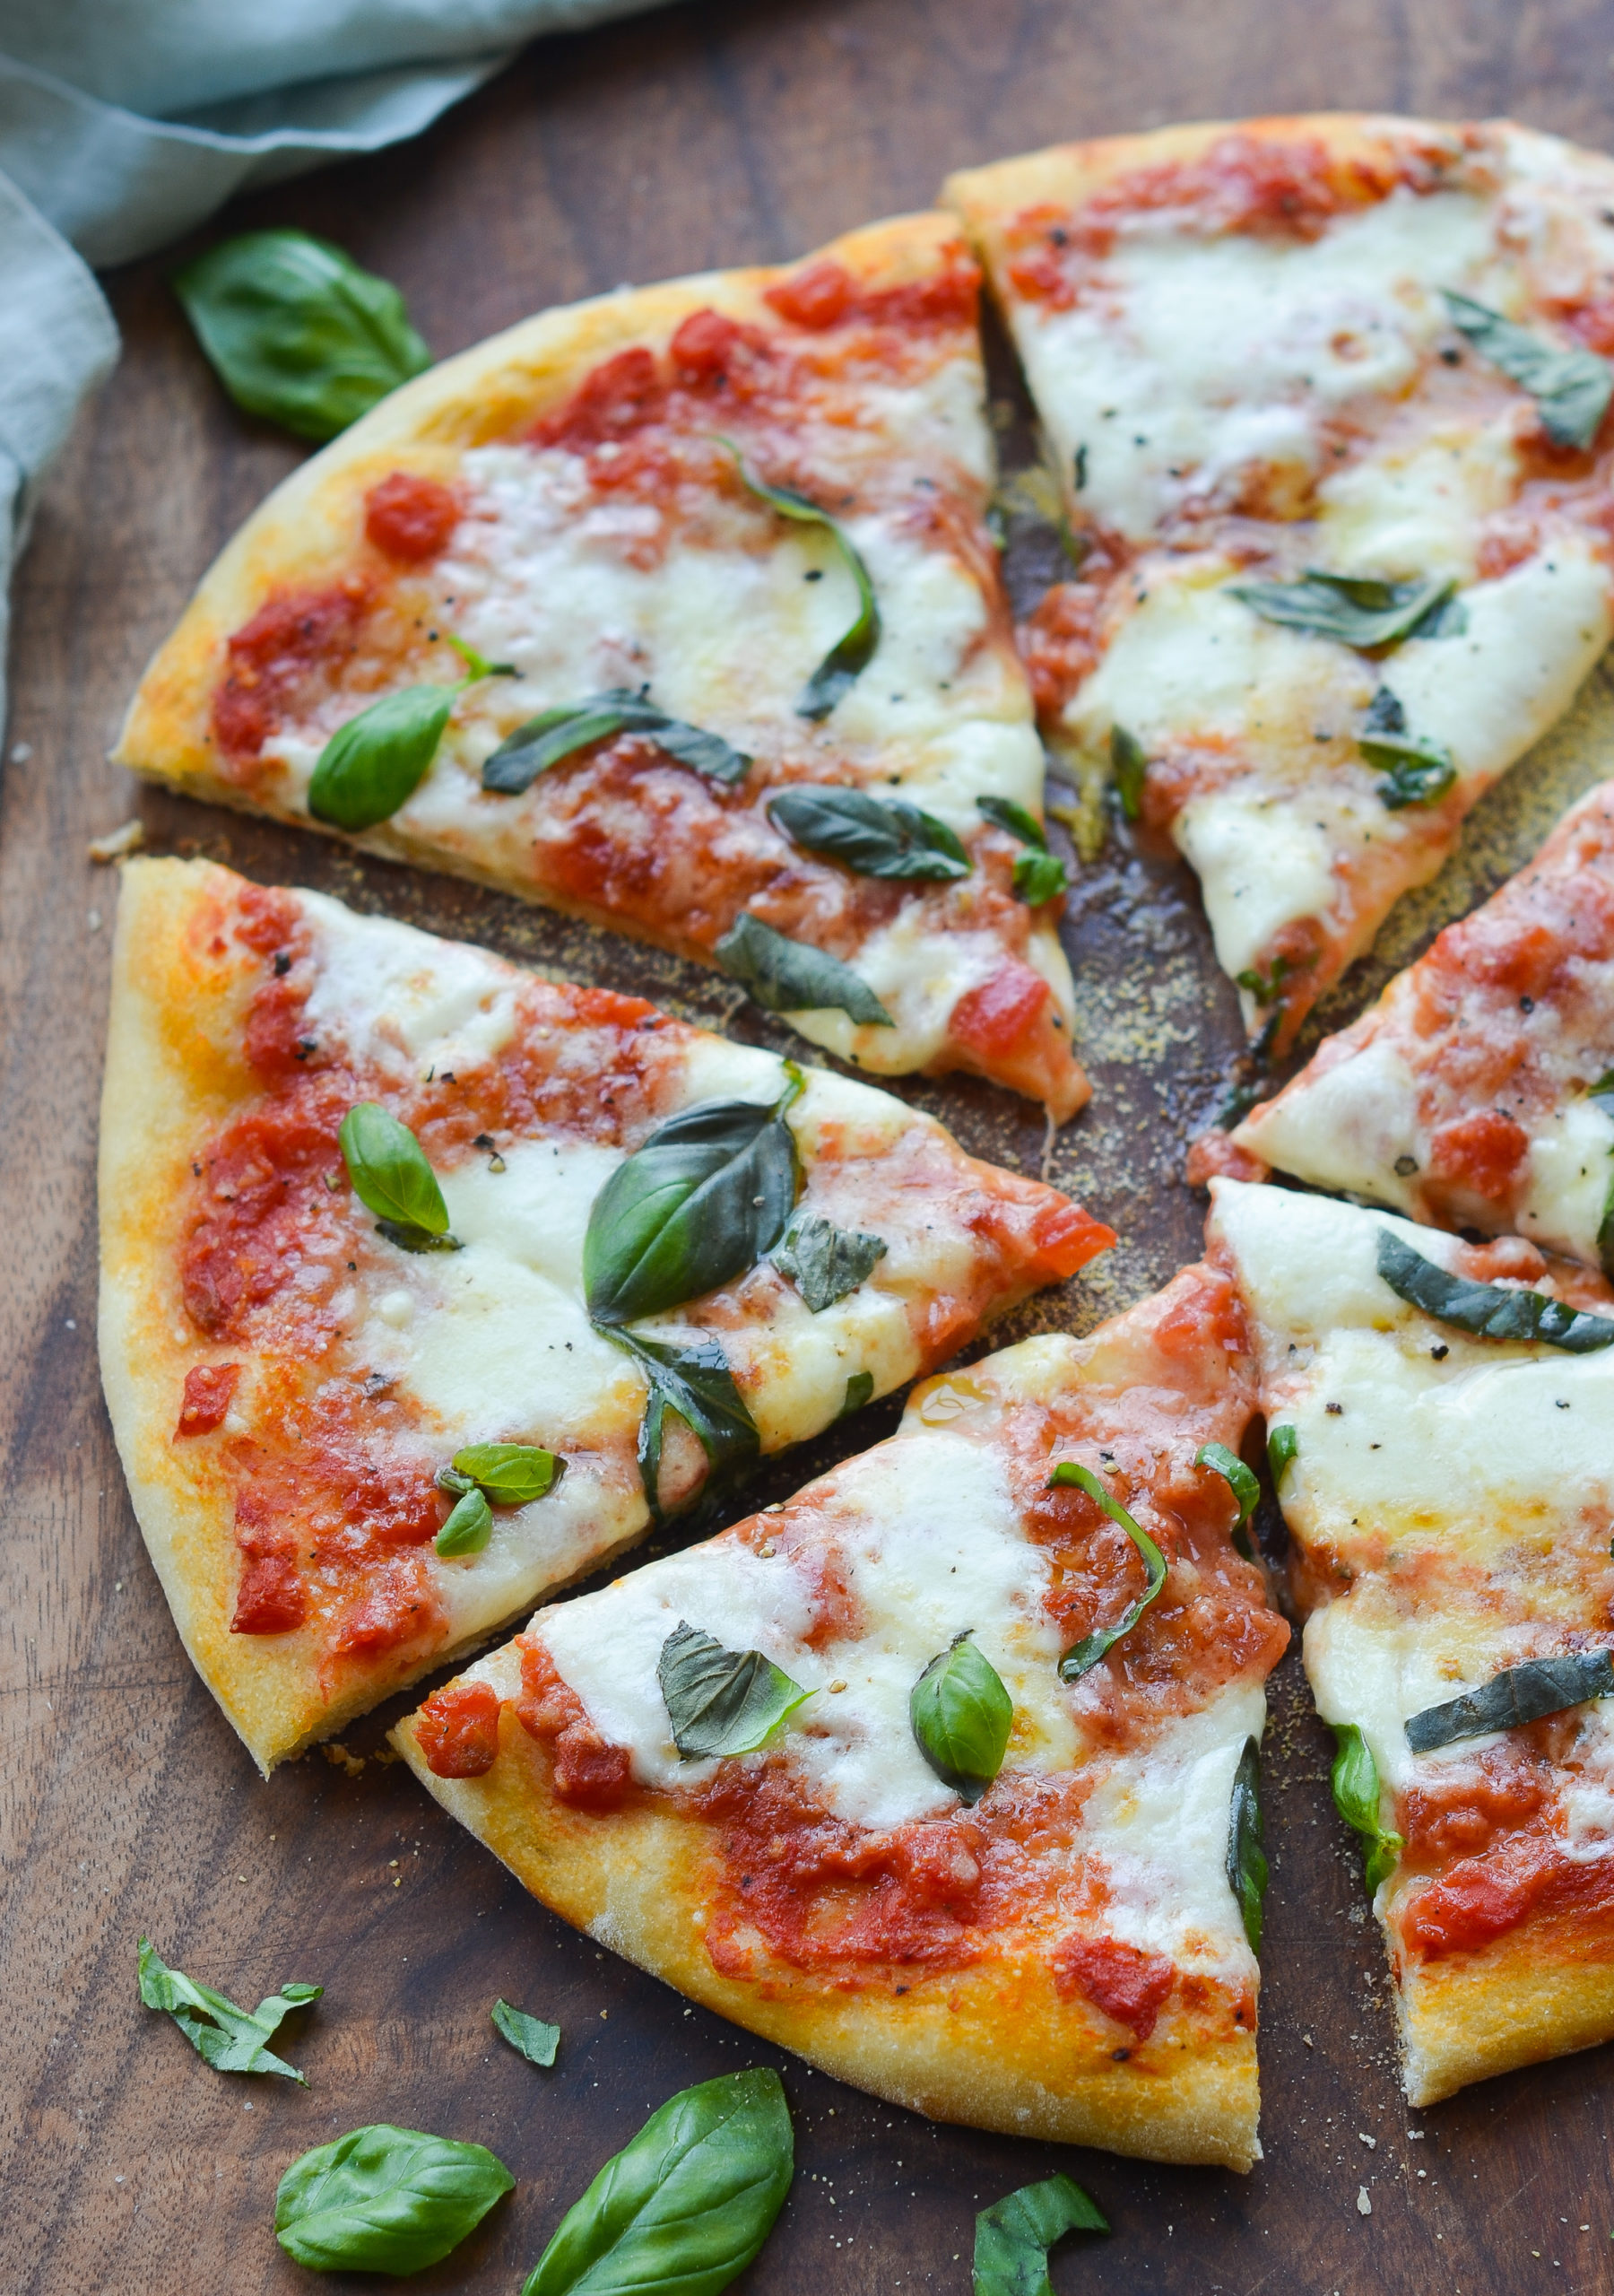 Pizza Making FAQs: How to Make Awesome Pizza at Home